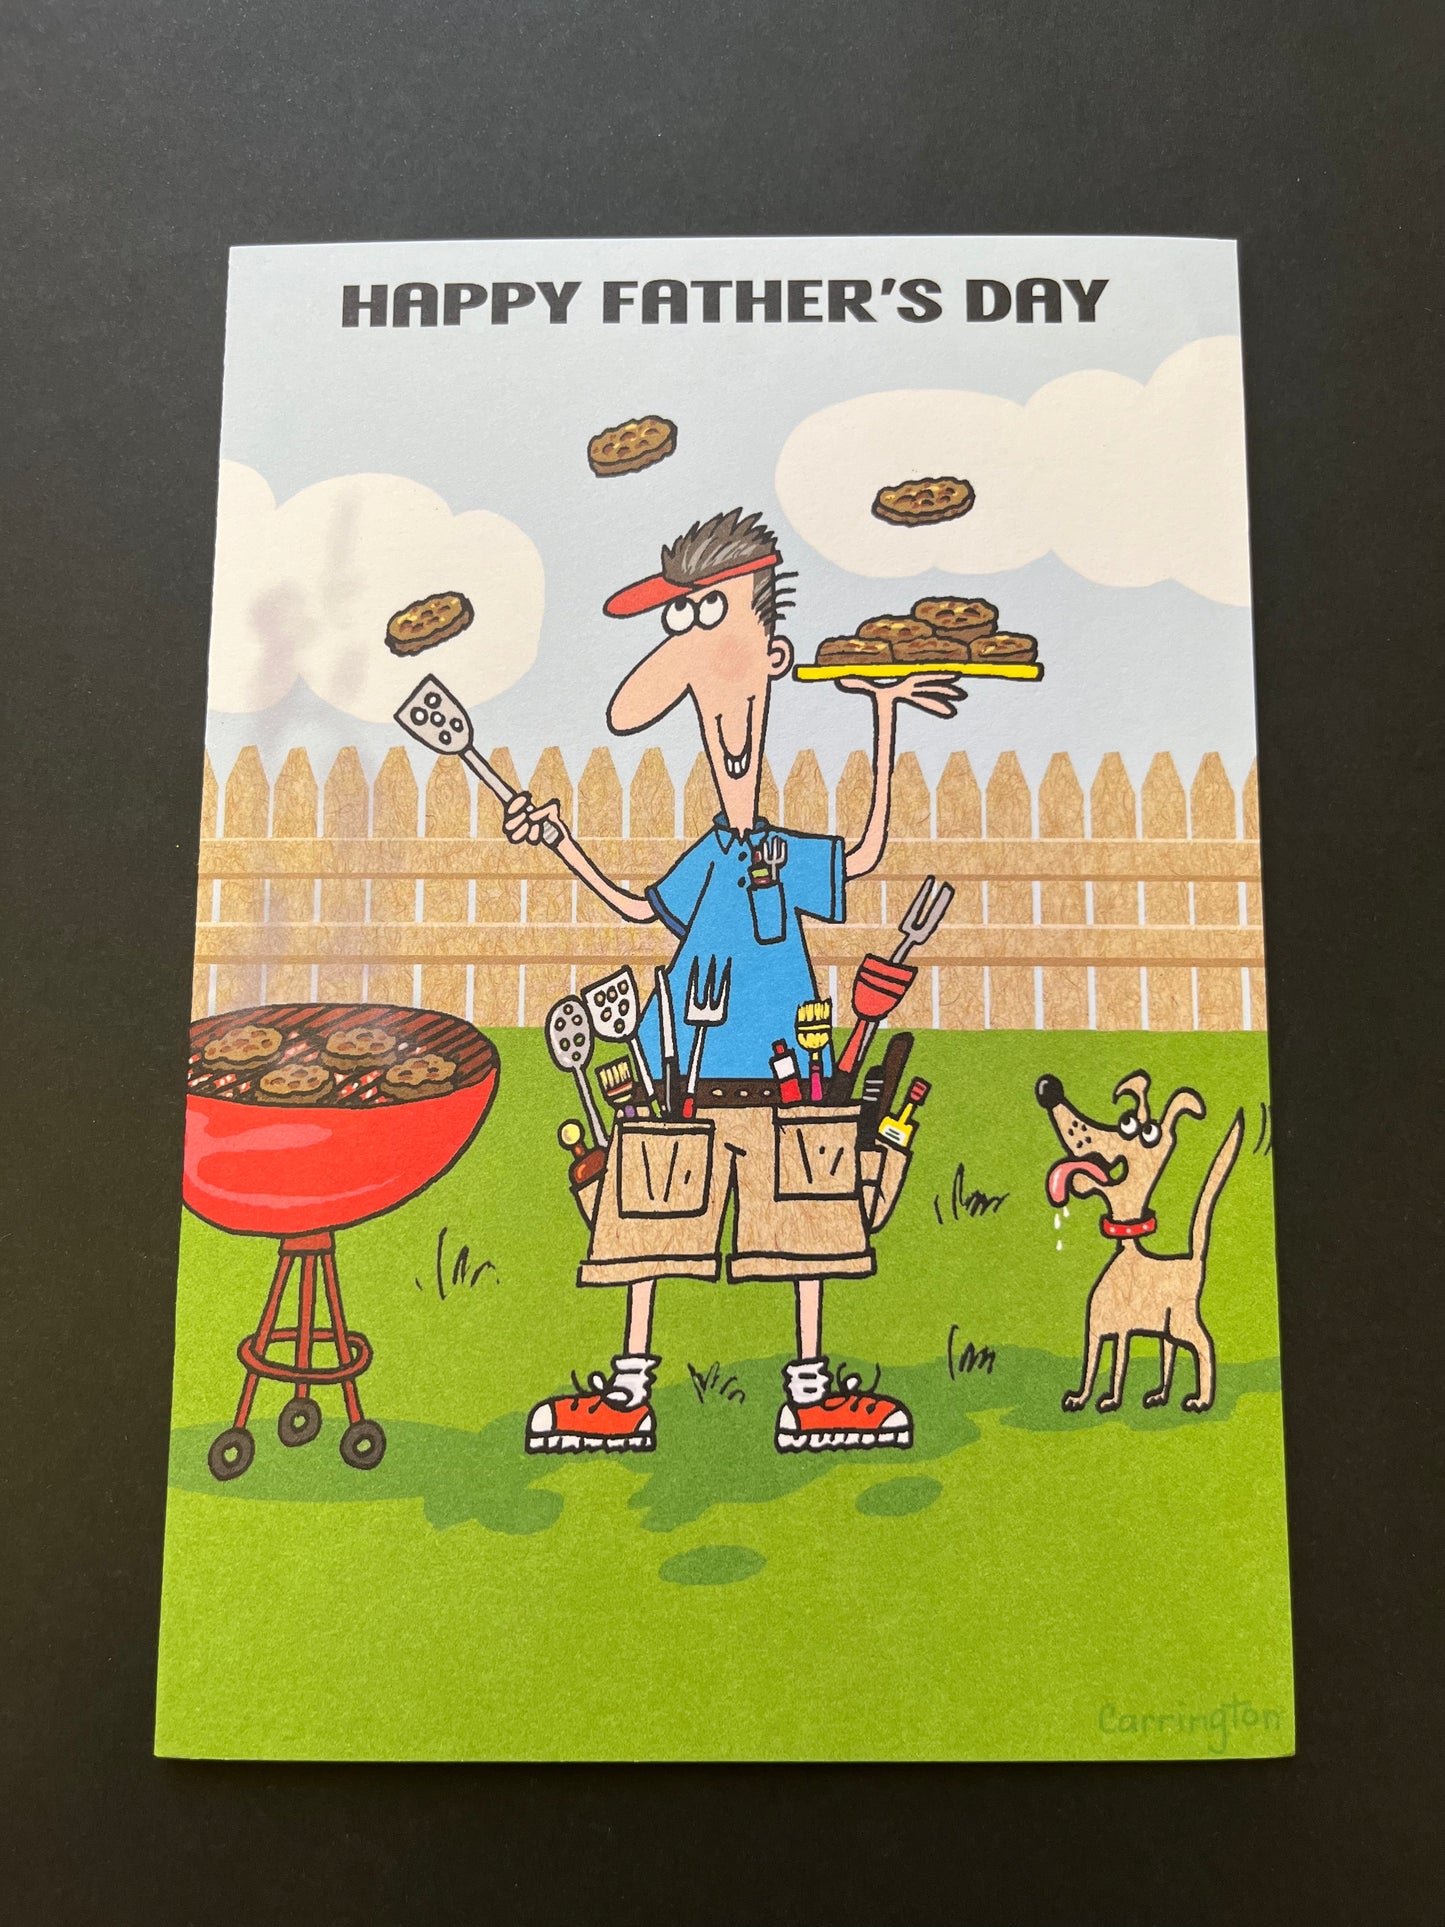 Rare Dad - Father's Day Card